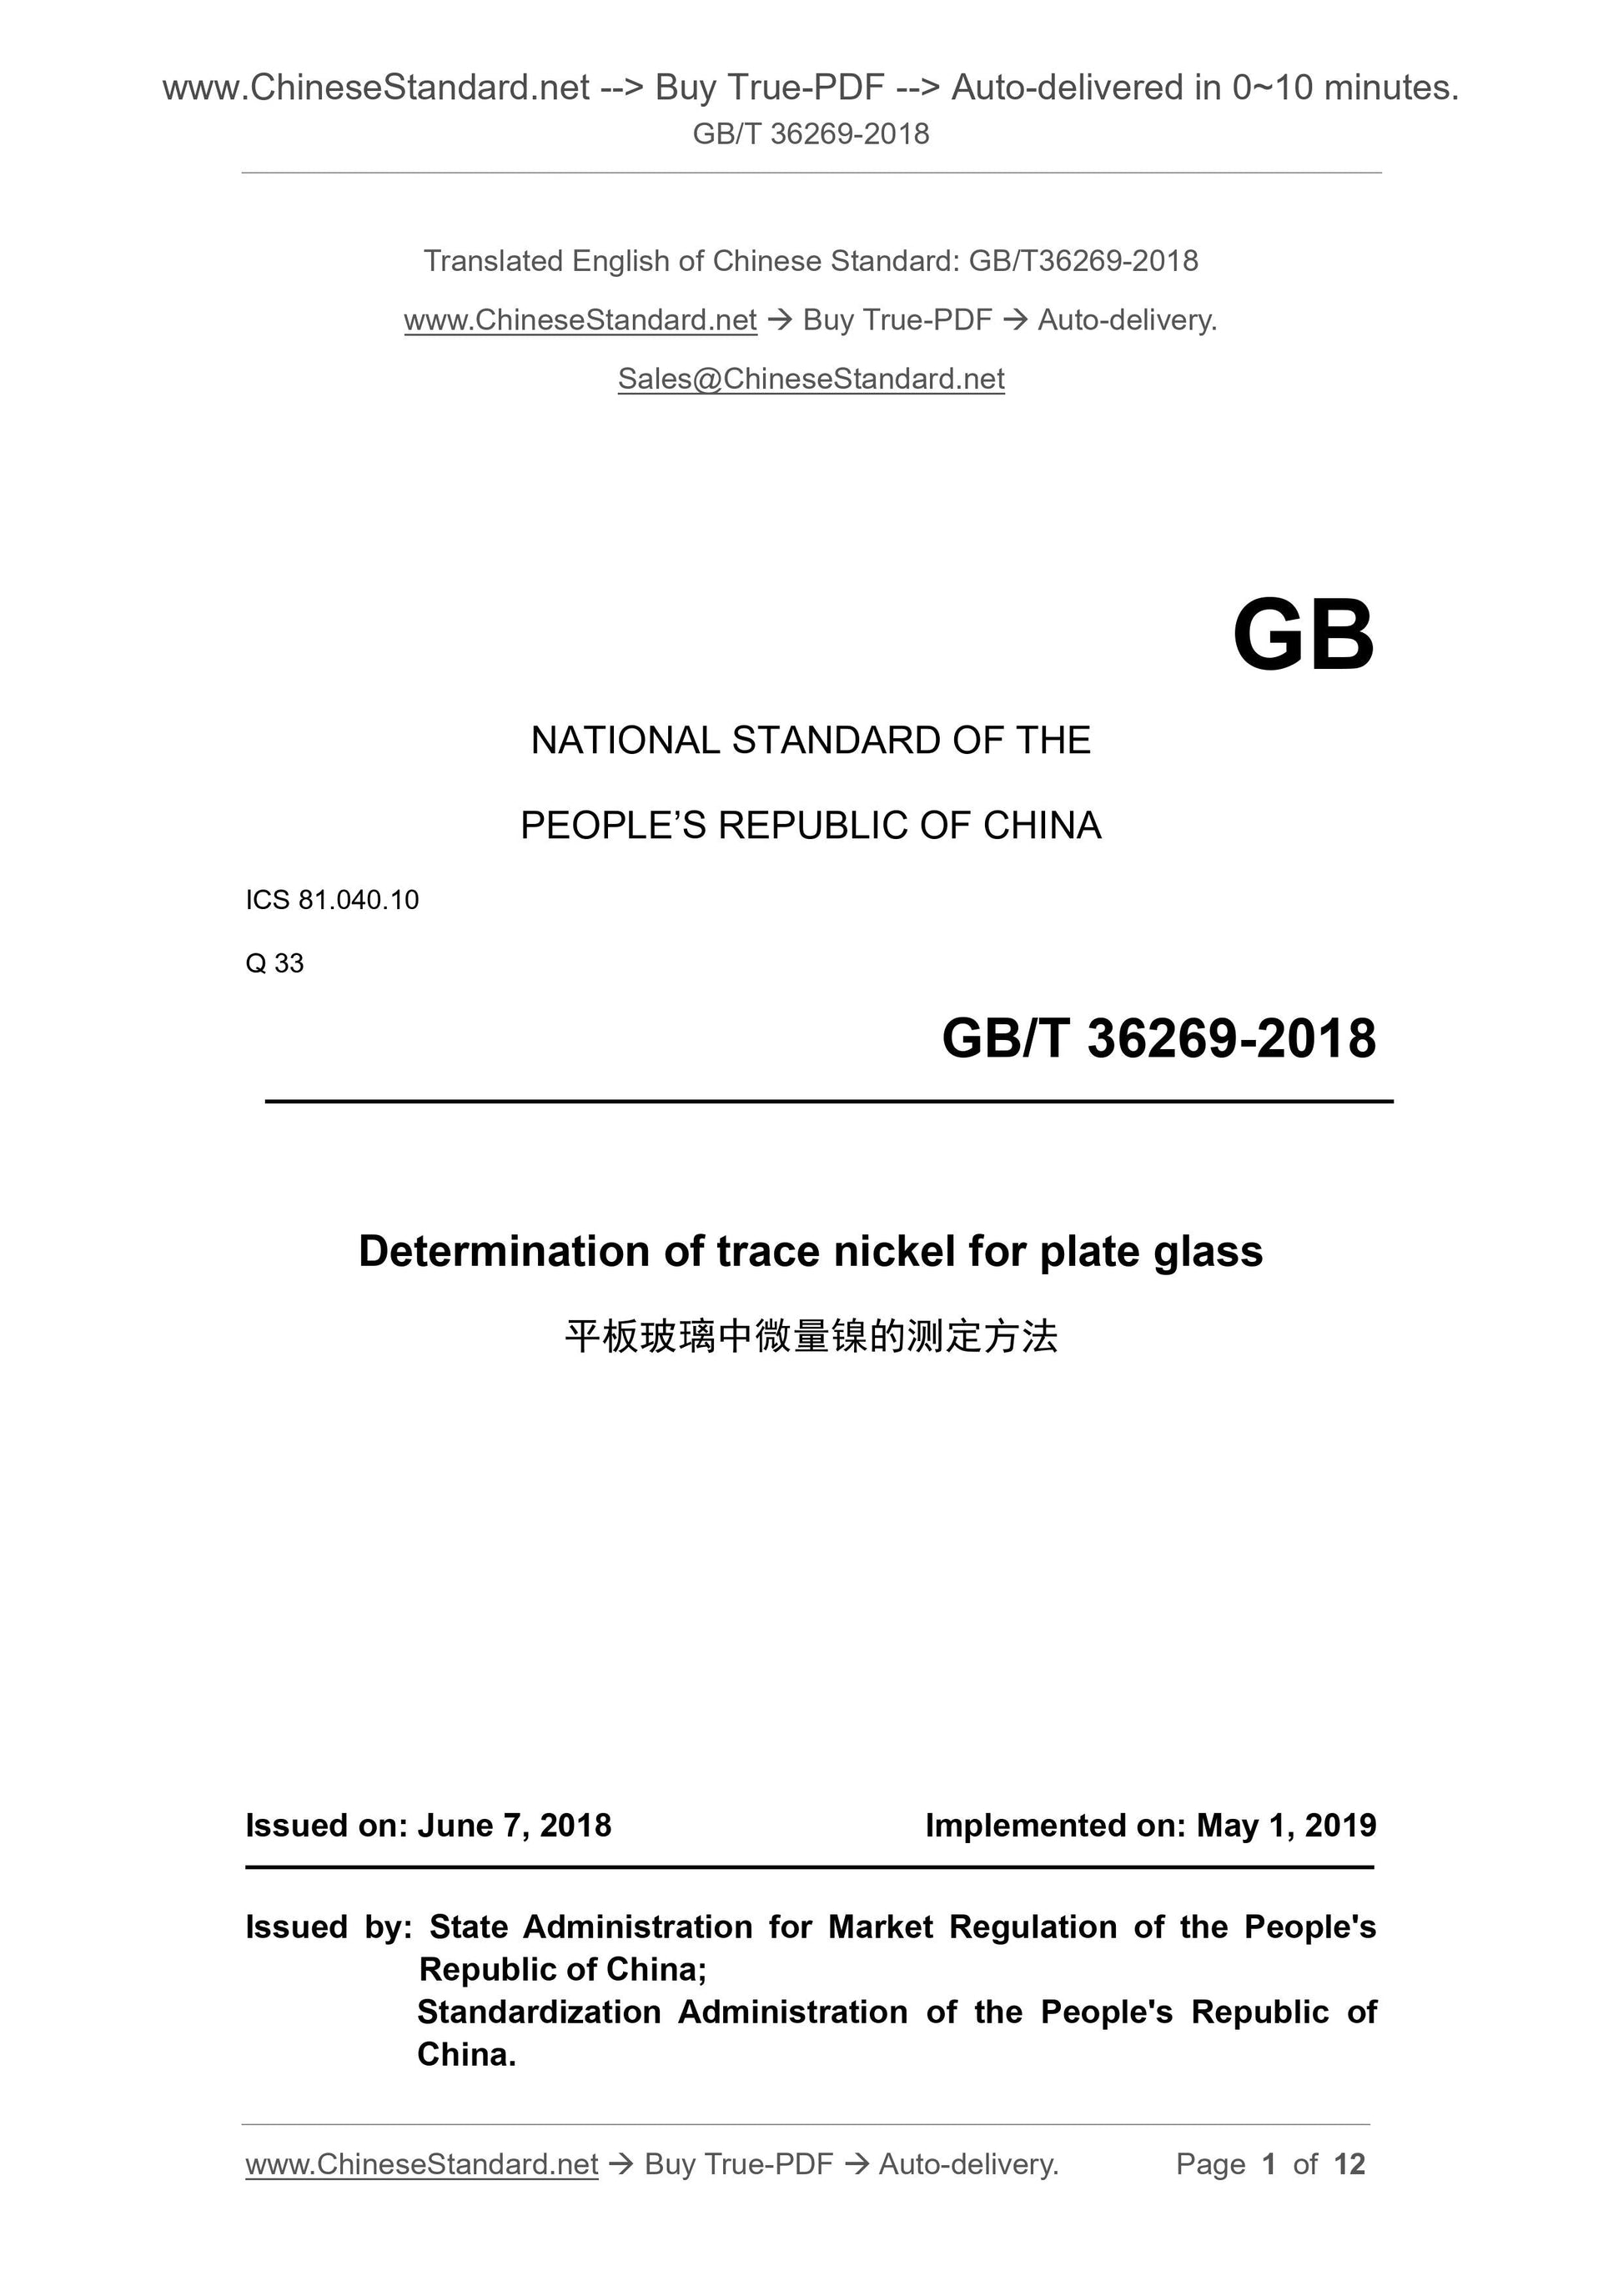 GB/T 36269-2018 Page 1